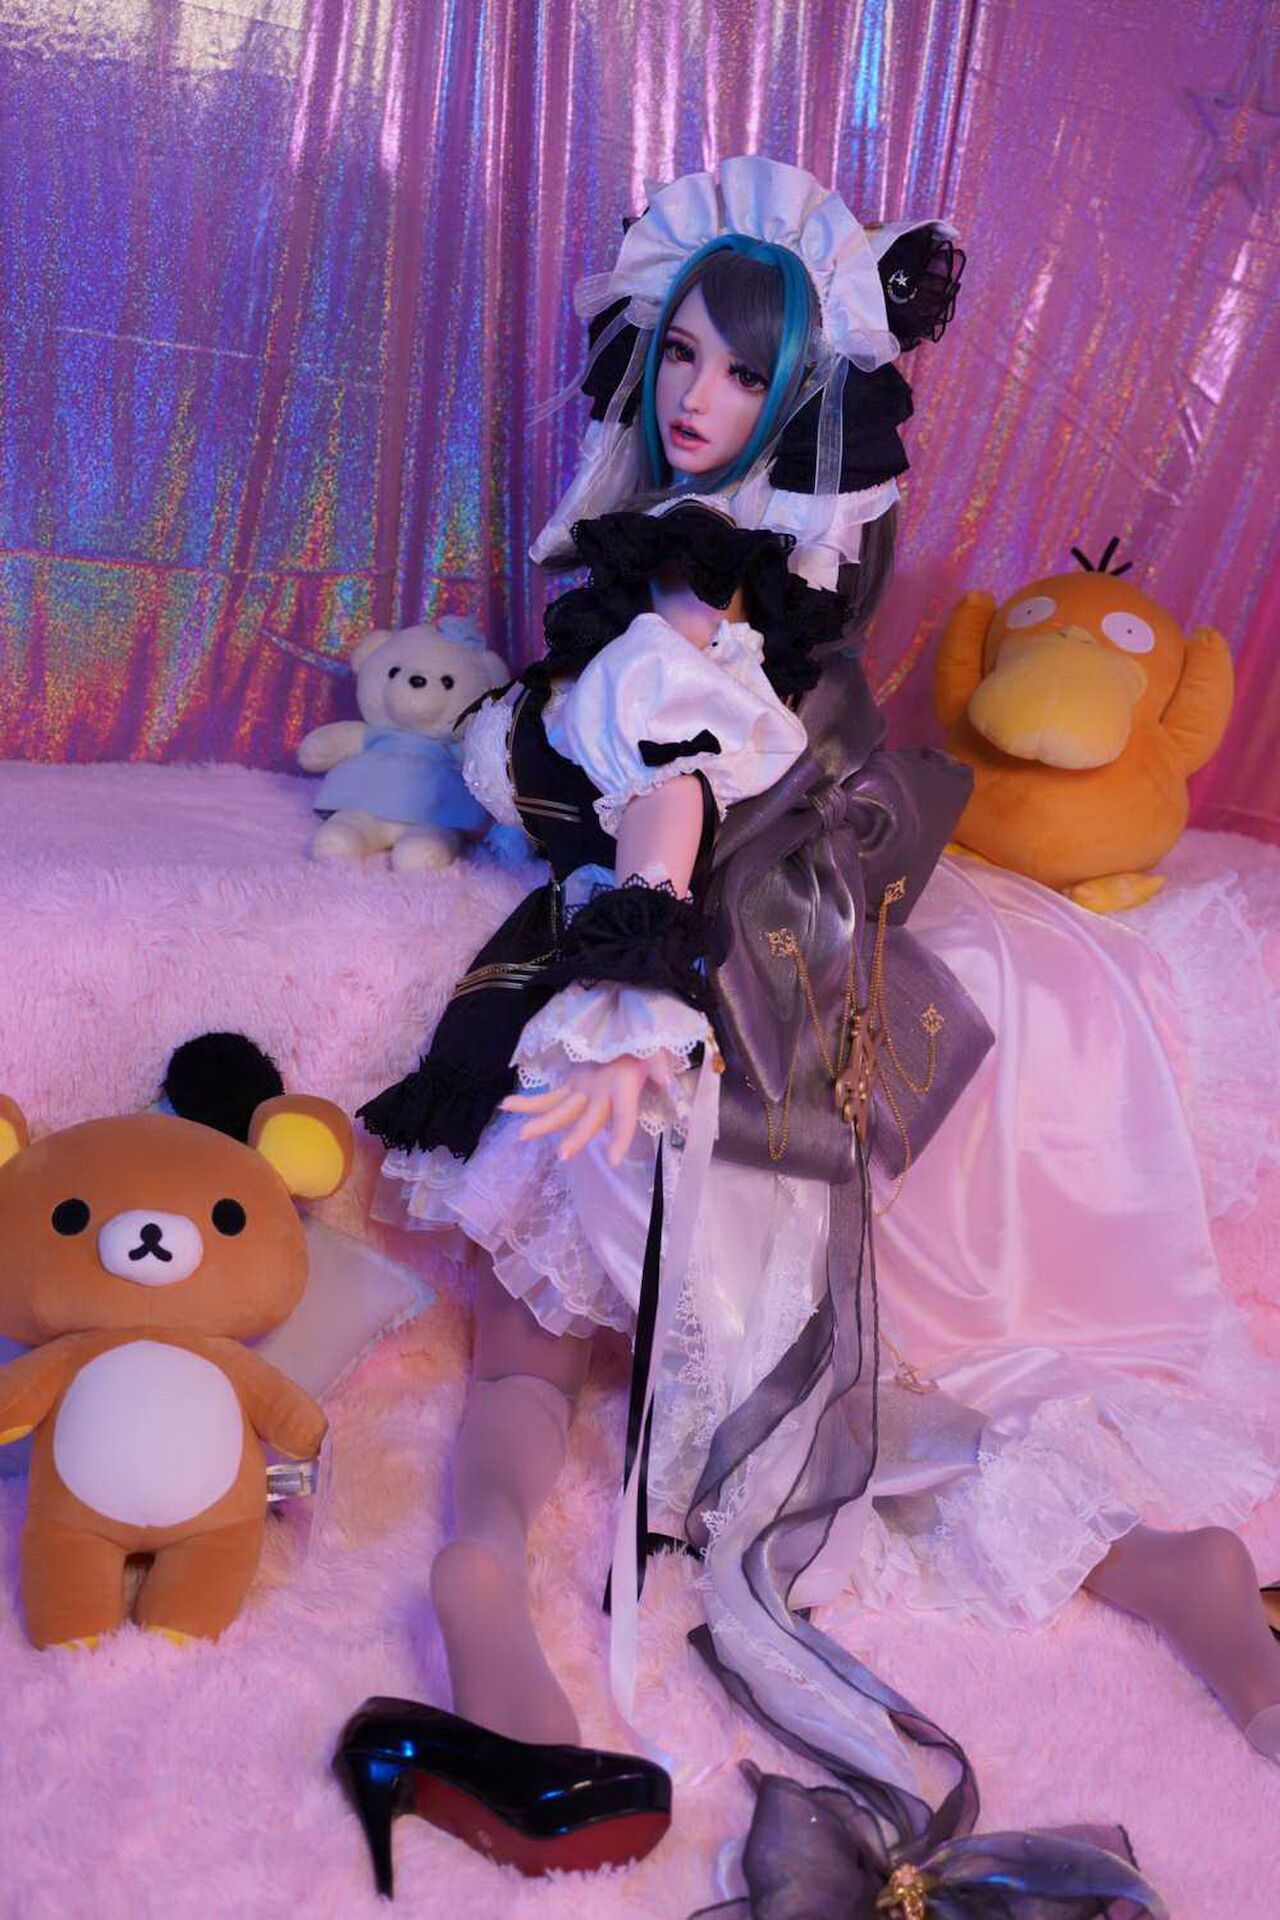 Meow meow meow, your personal maid Cheshire Meow Cosplay is here !! by Little pickled cucumber @devil_sama8844 32